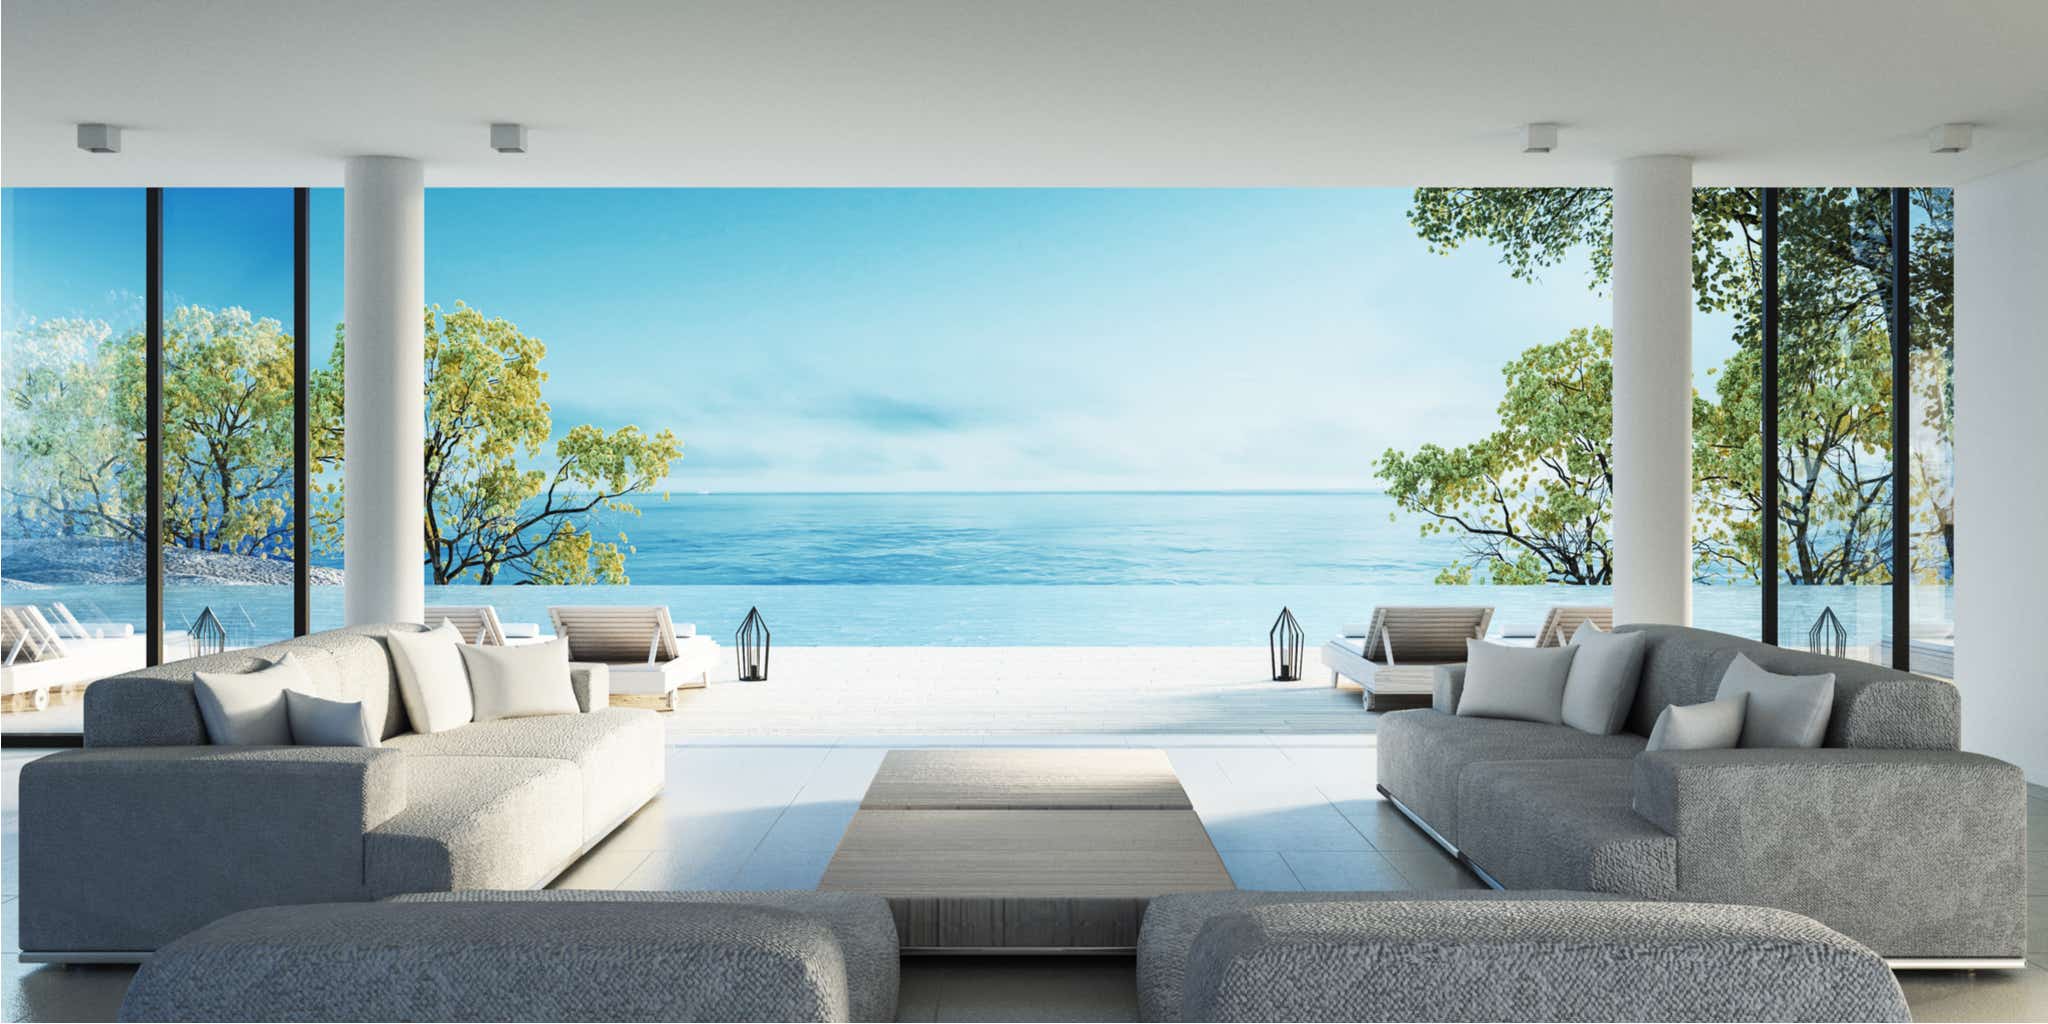 Overseas property, view of outdoor living space and sea in background